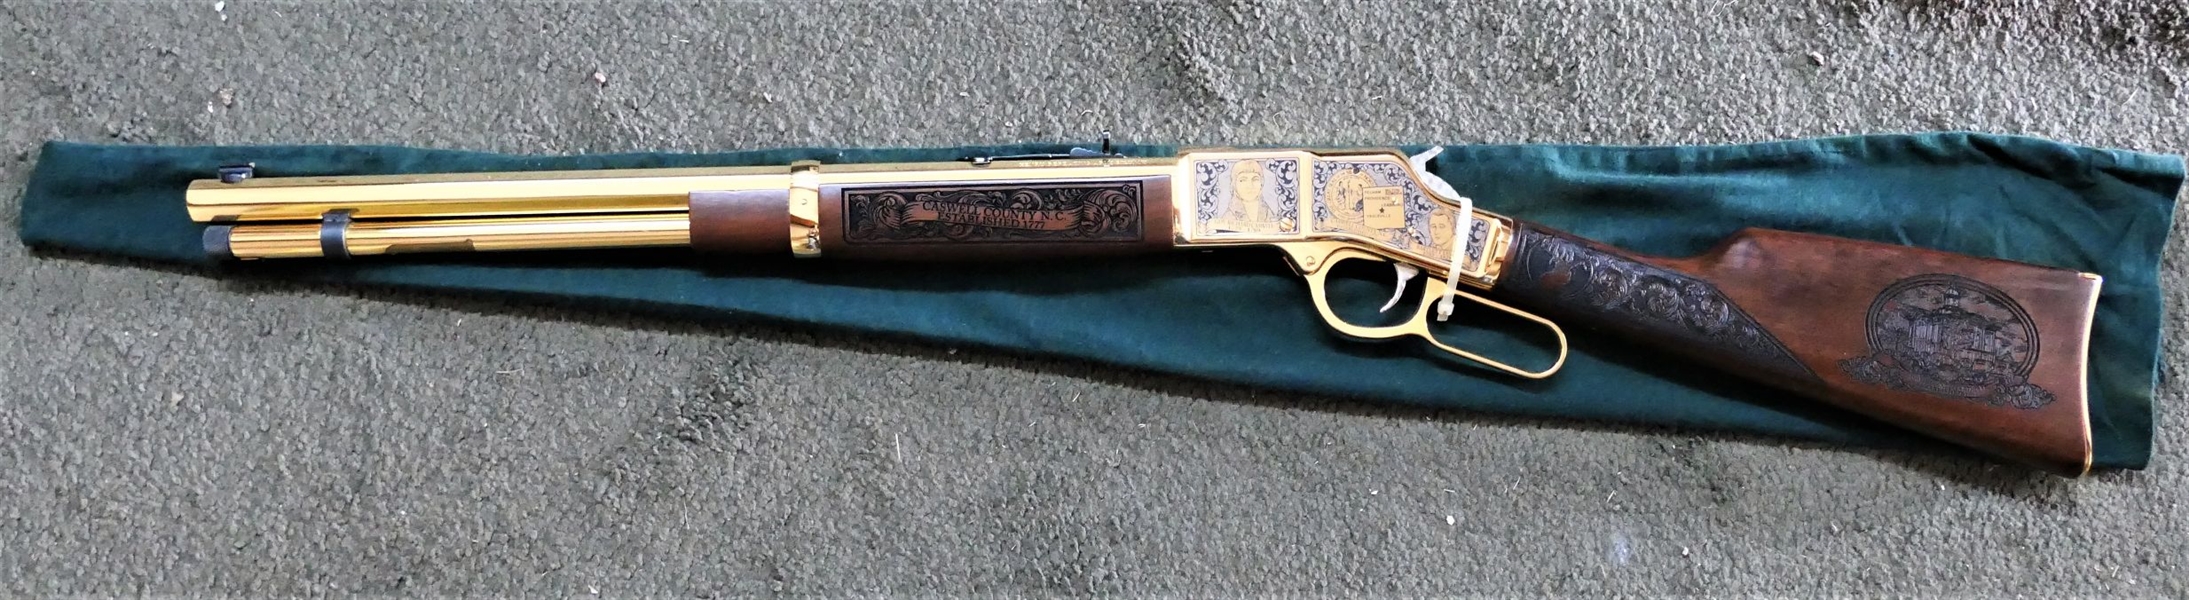 Henry Repeating Arms Co. .44 REM Magnum / .44 SPL - Caswell County North Carolina -Dated 2007 - Ten of Ten Produced - Engraved with Caswell County Scenes and Important Figures - Thomas Day, Town...